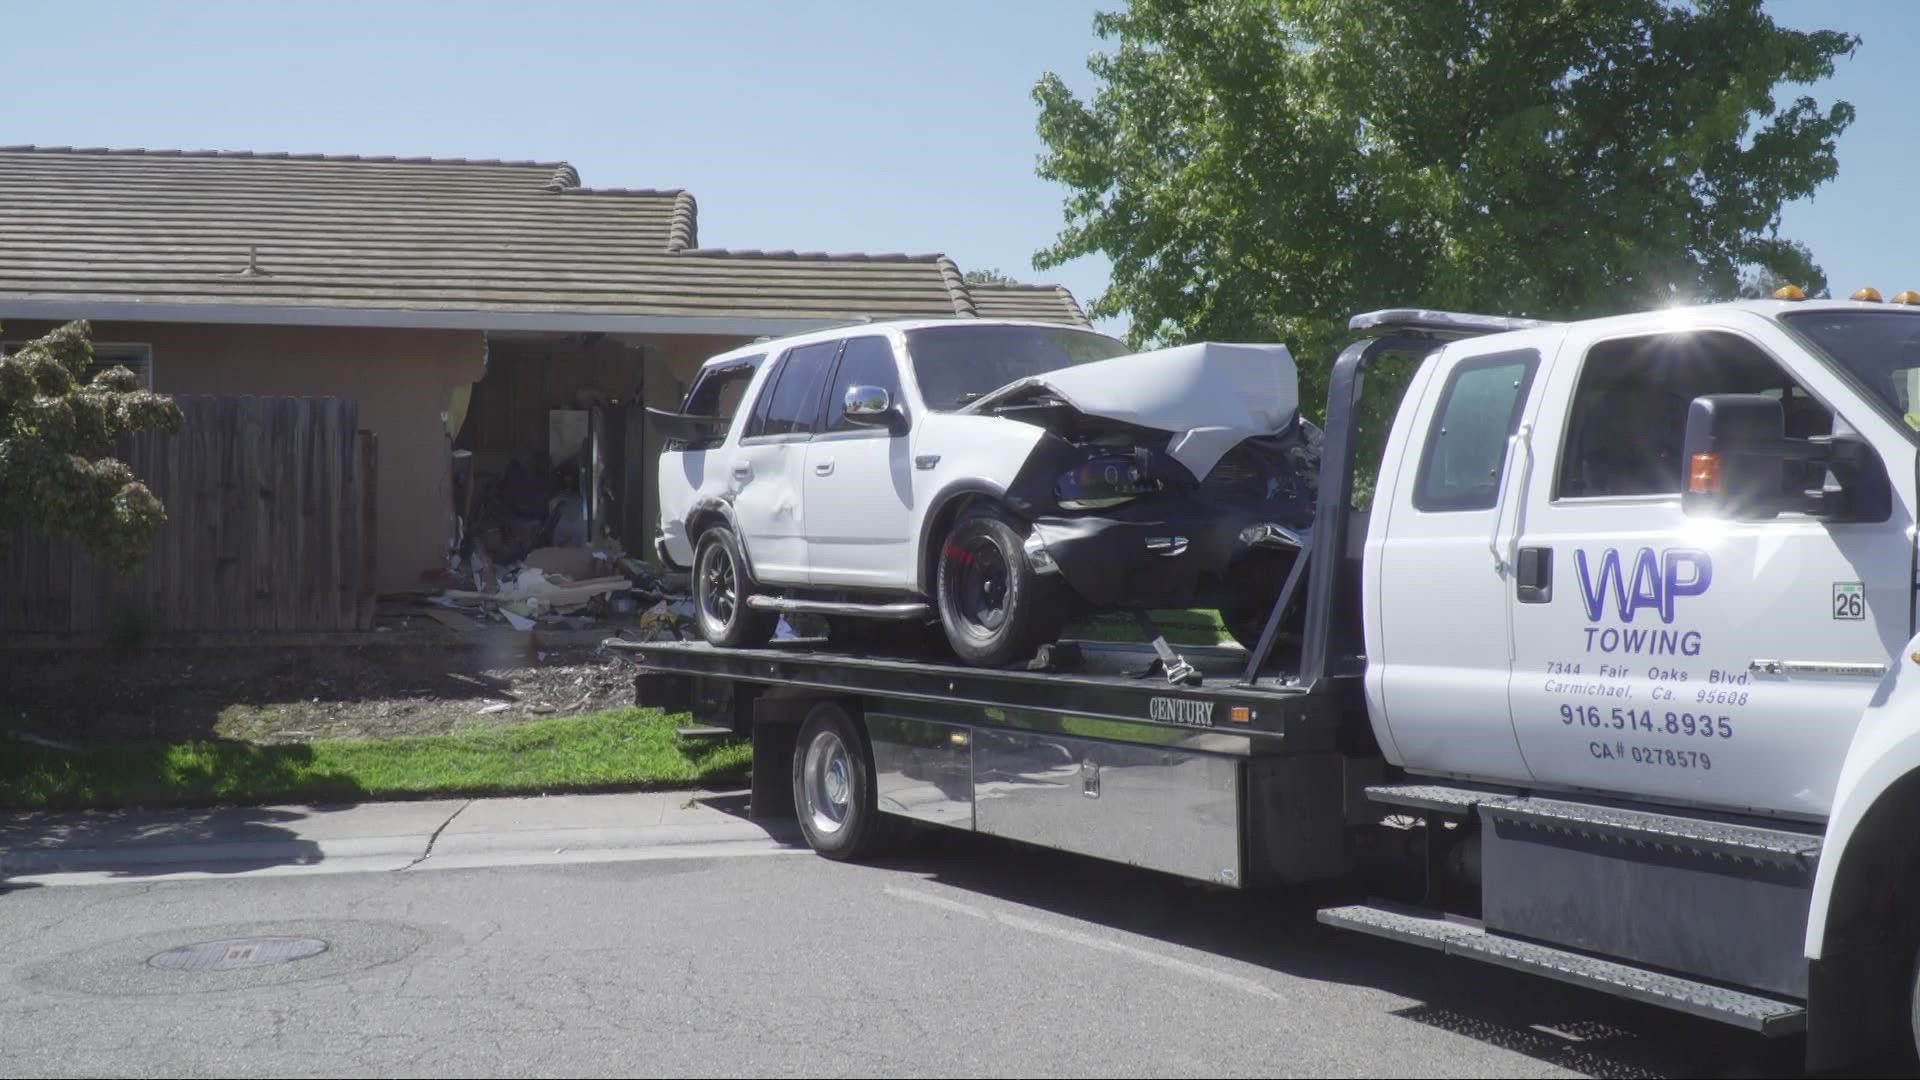 A photo from the Sacramento Metropolitan Fire District shows a white vehicle with damage to the front end inside a home.